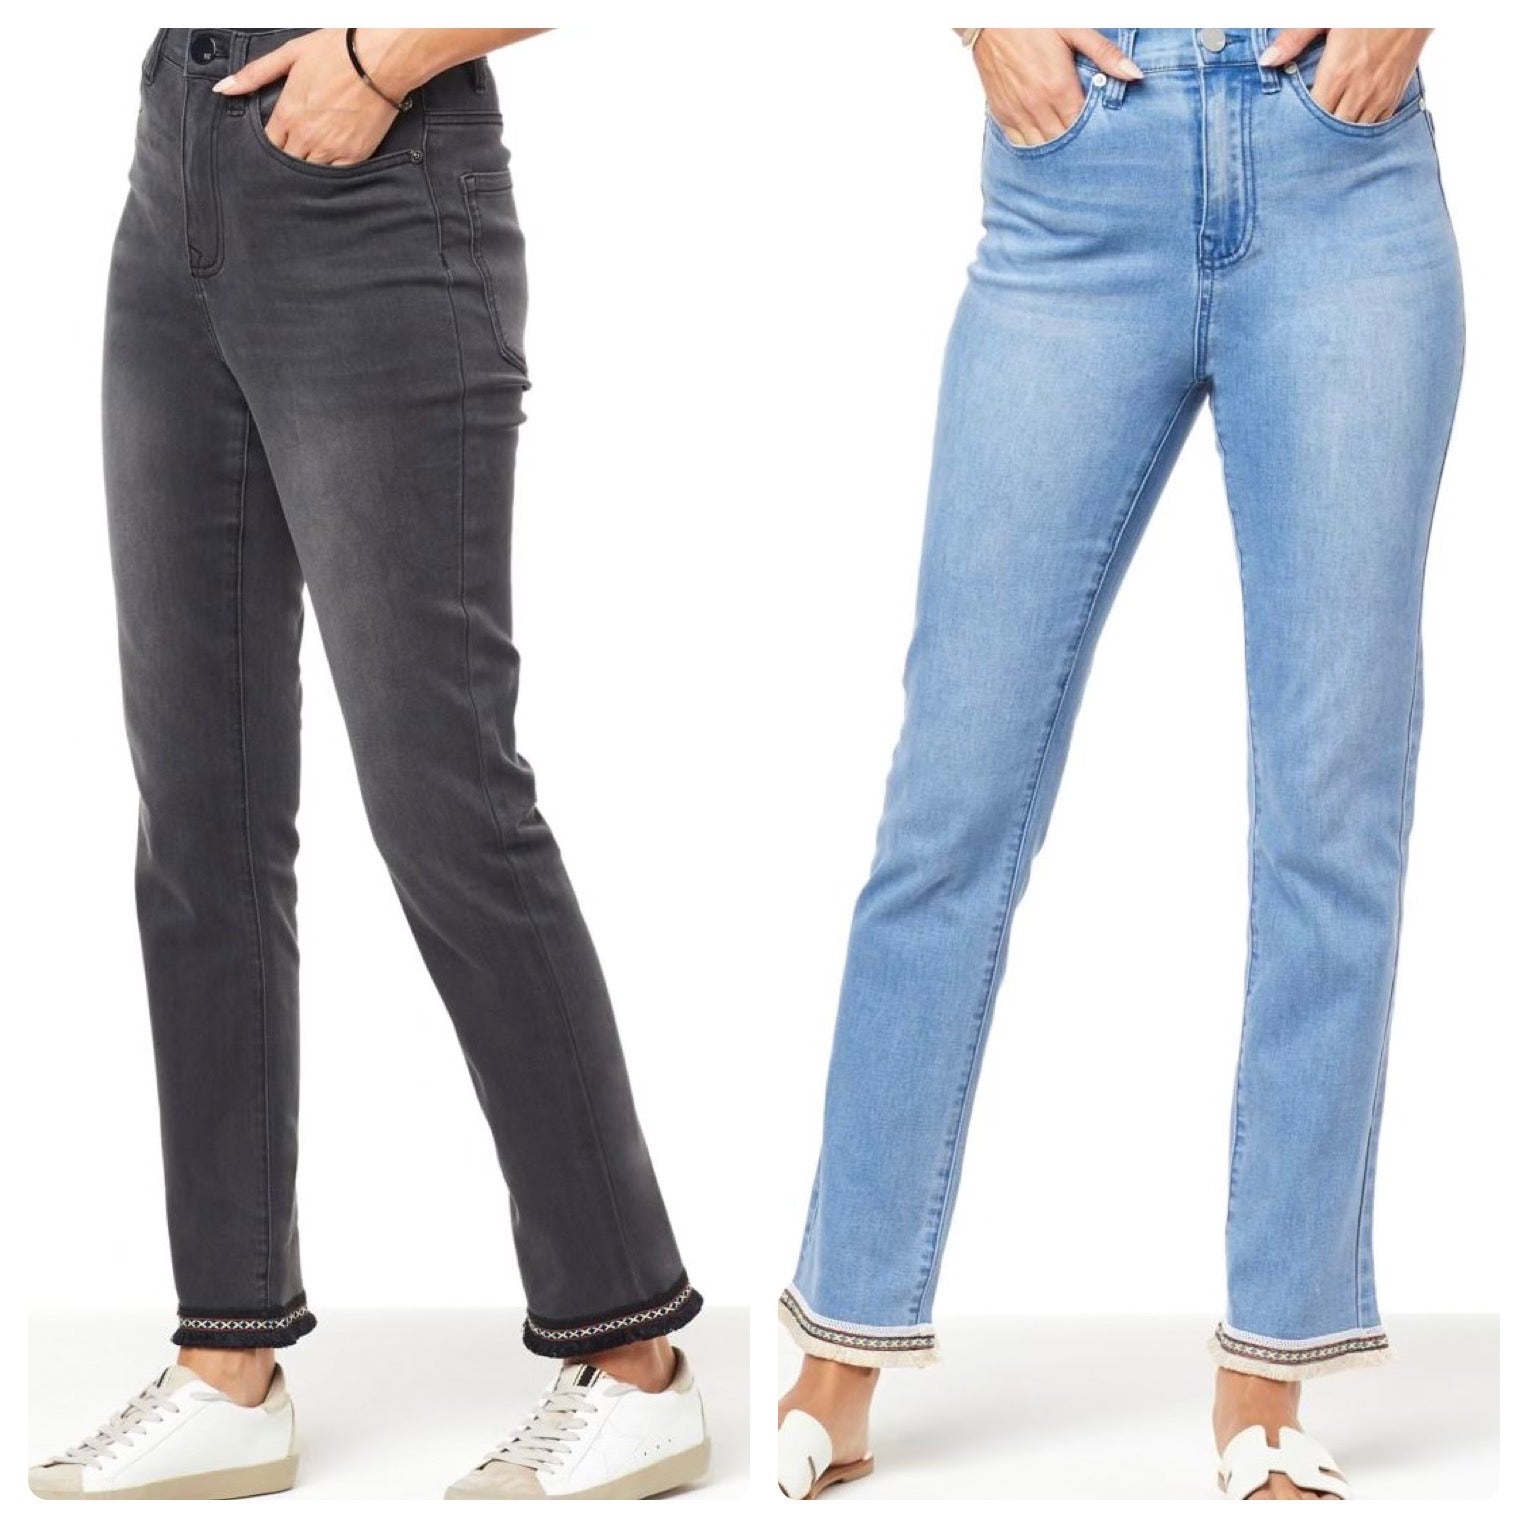 DG2 by Diane Gilman New Classic Stretch Straight-Leg Ankle Jean.